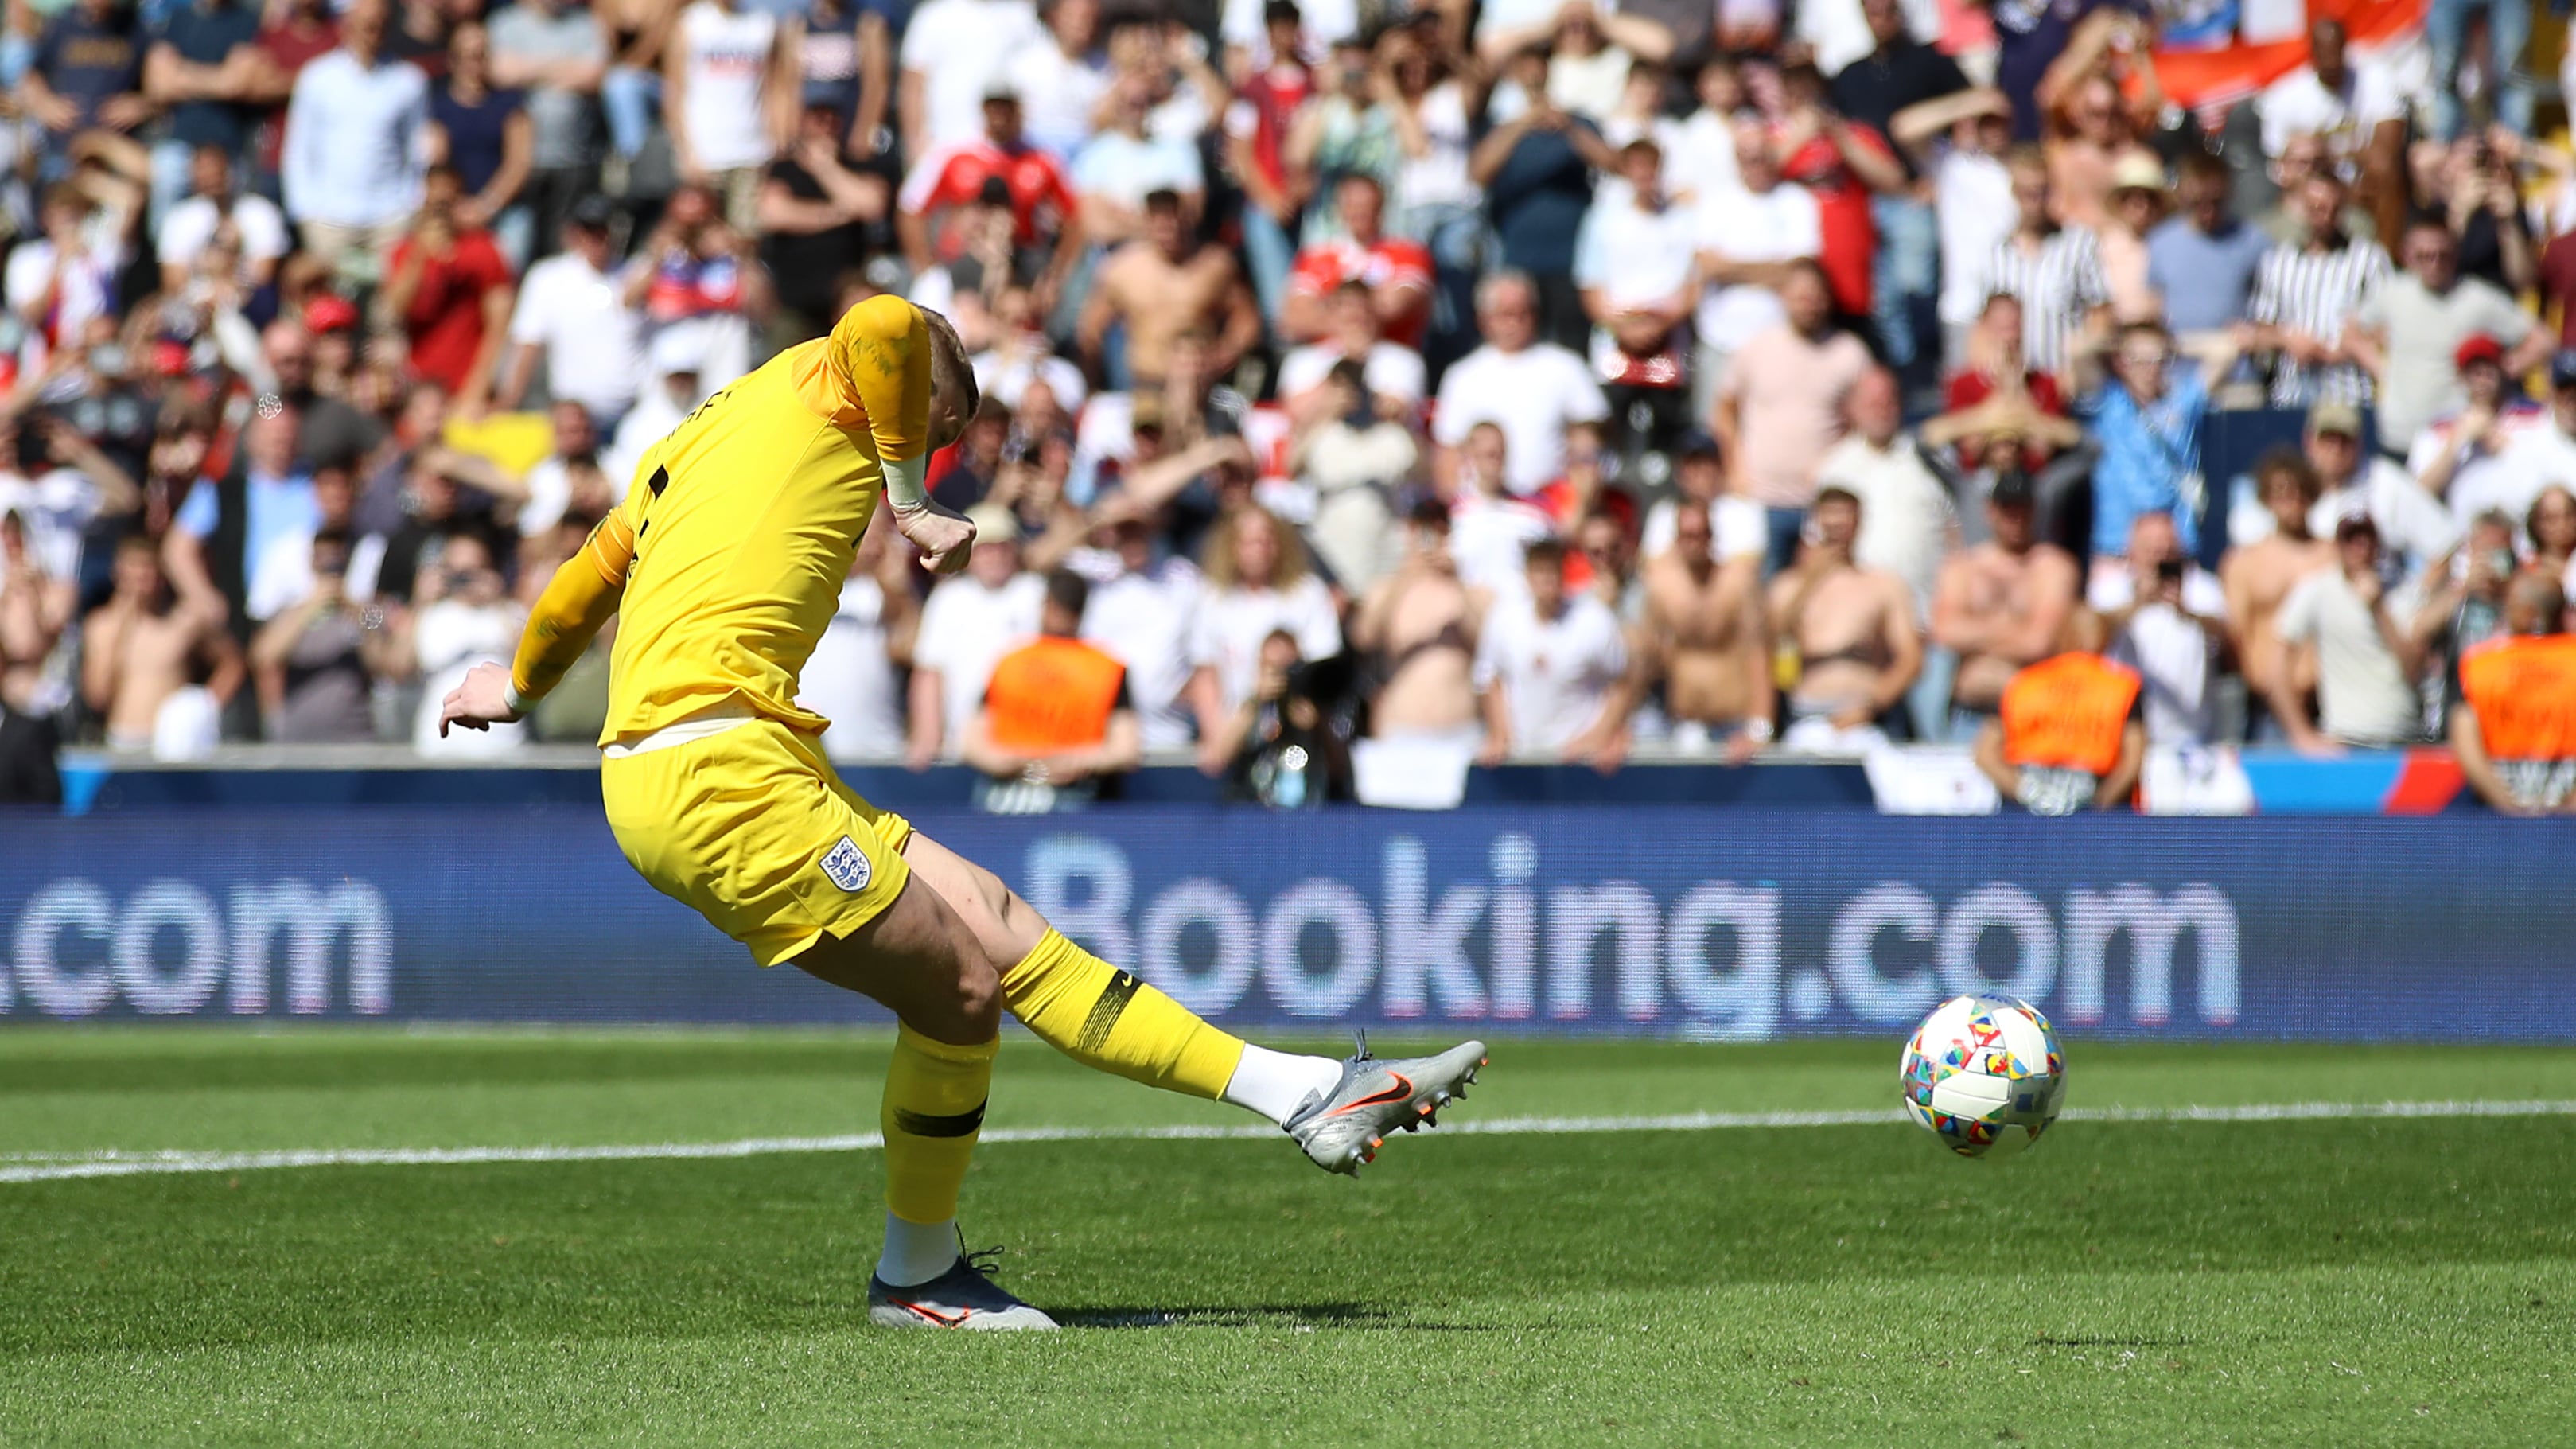 England goalkeeper Jordan Pickford scored a penalty during the shoot-out in the Nations League third place play-off